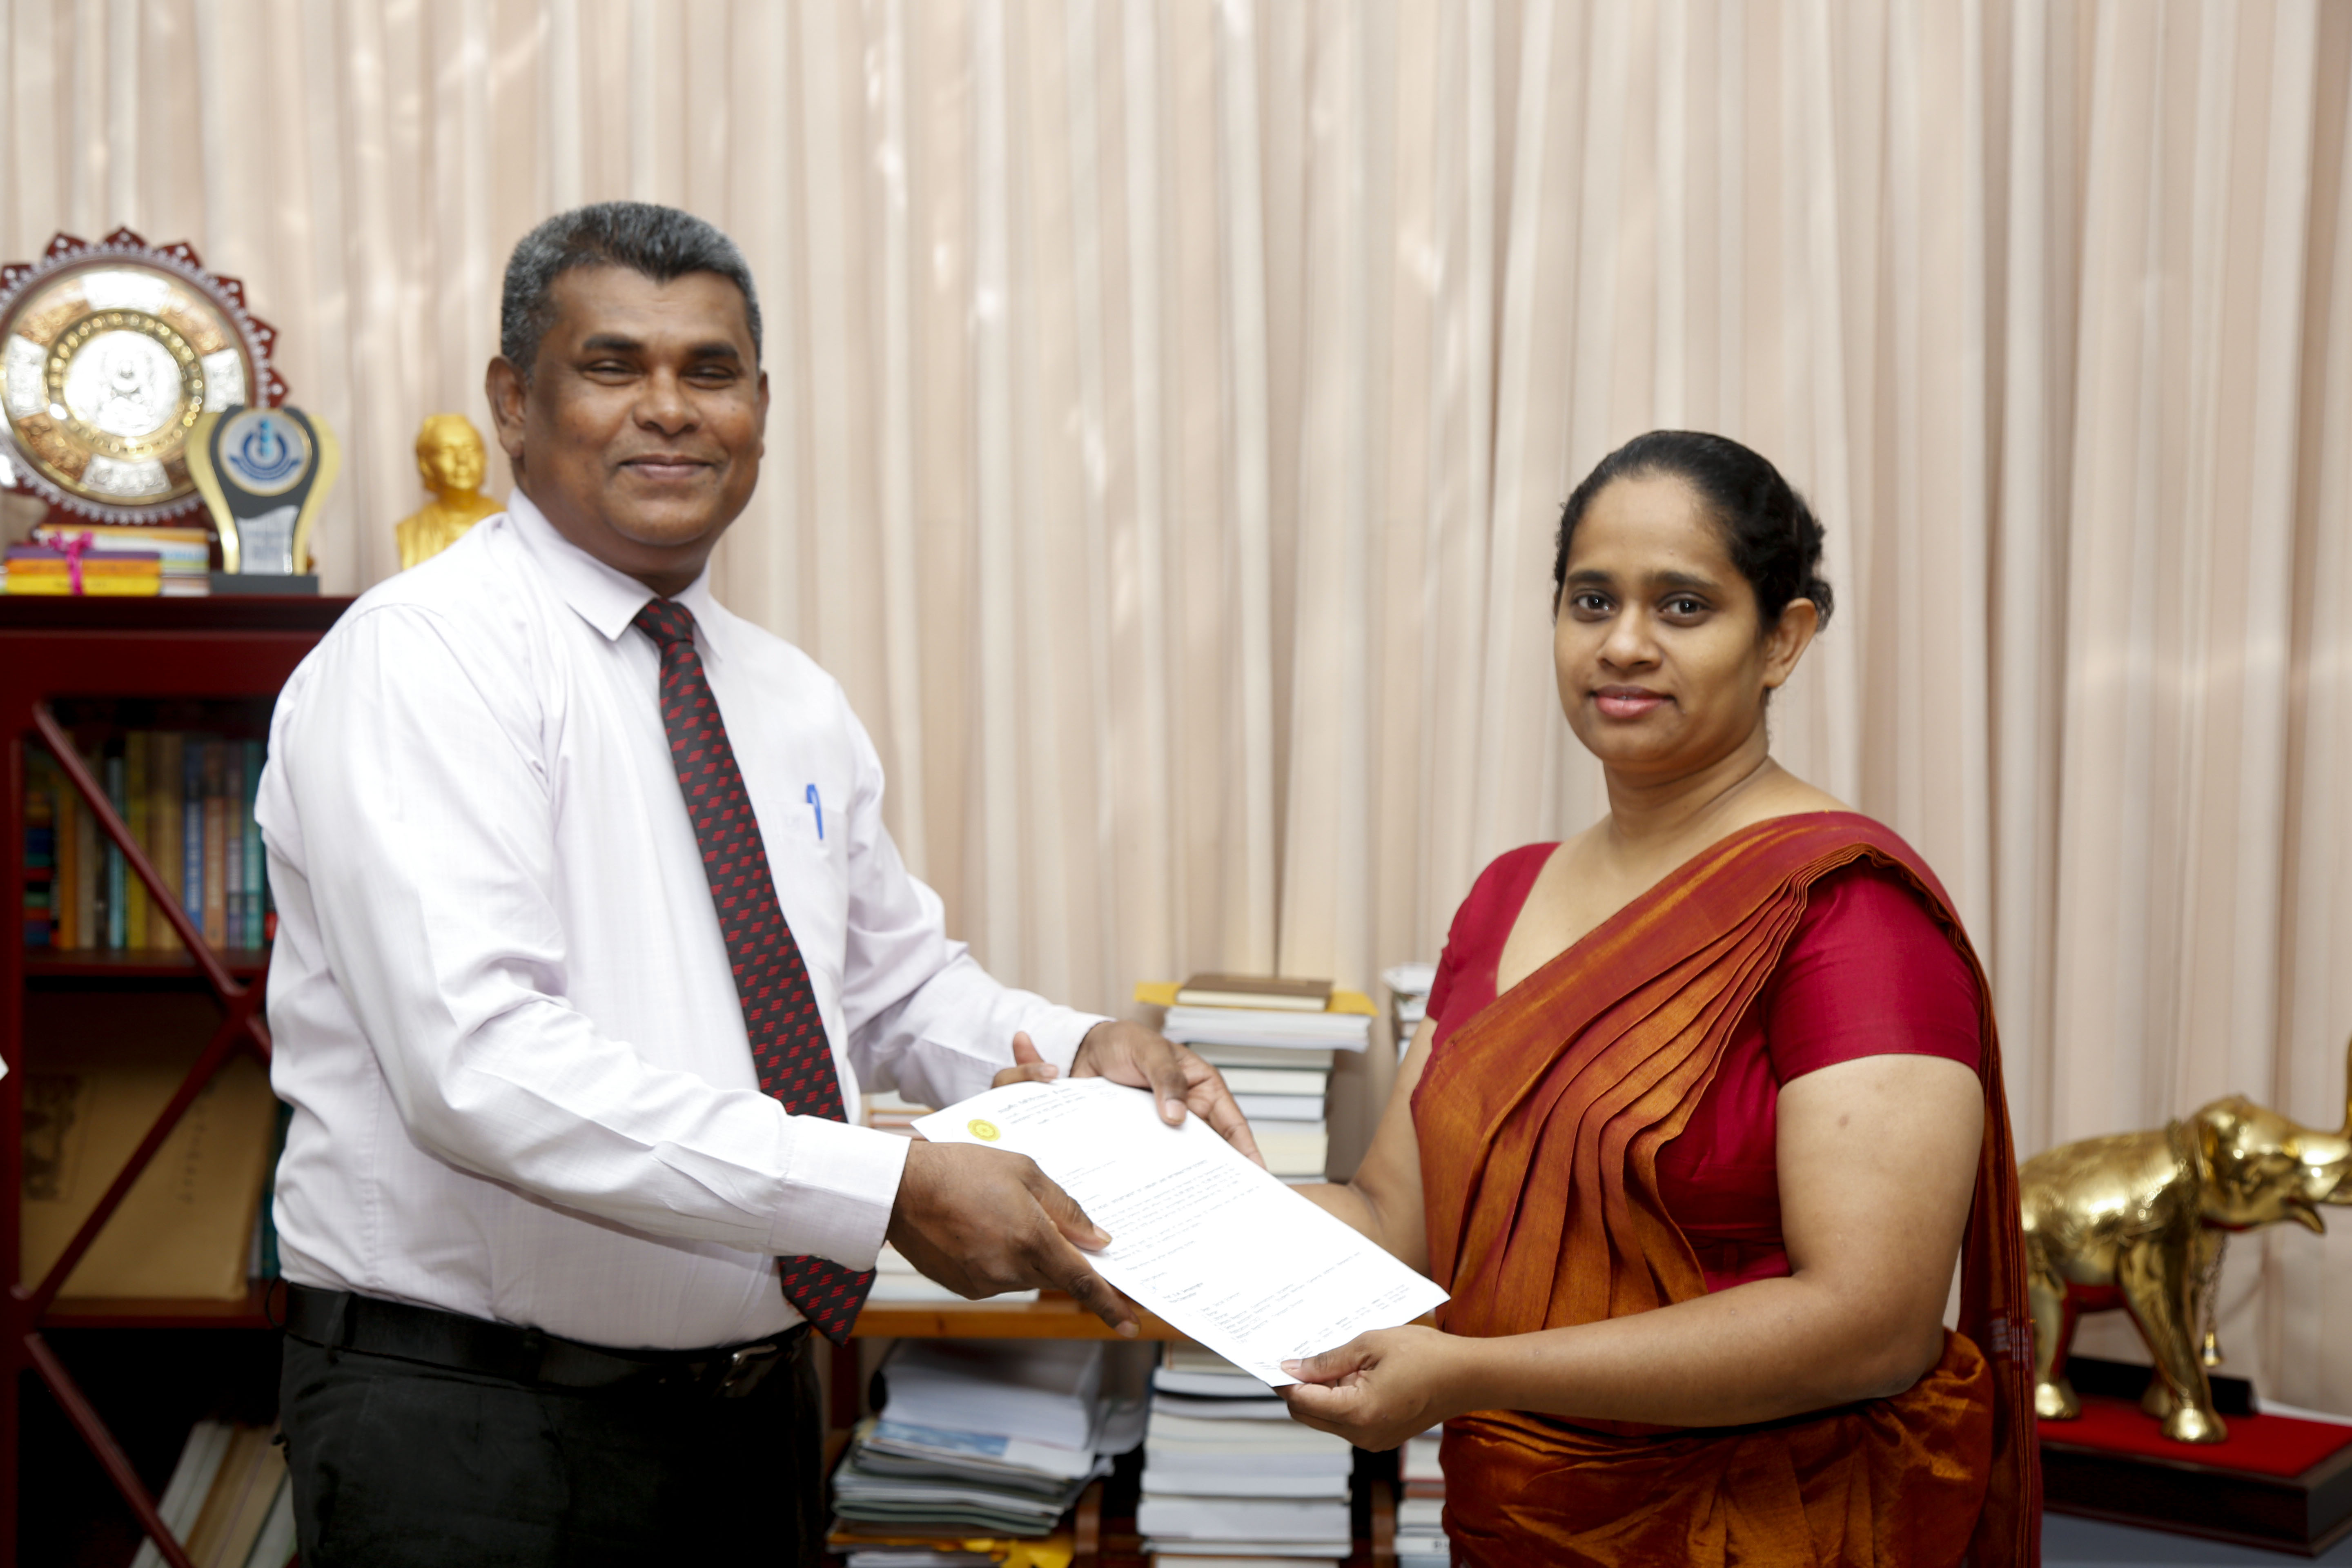 Dr. Namali Suraweera as the New Head of the Department of Library and Information Science